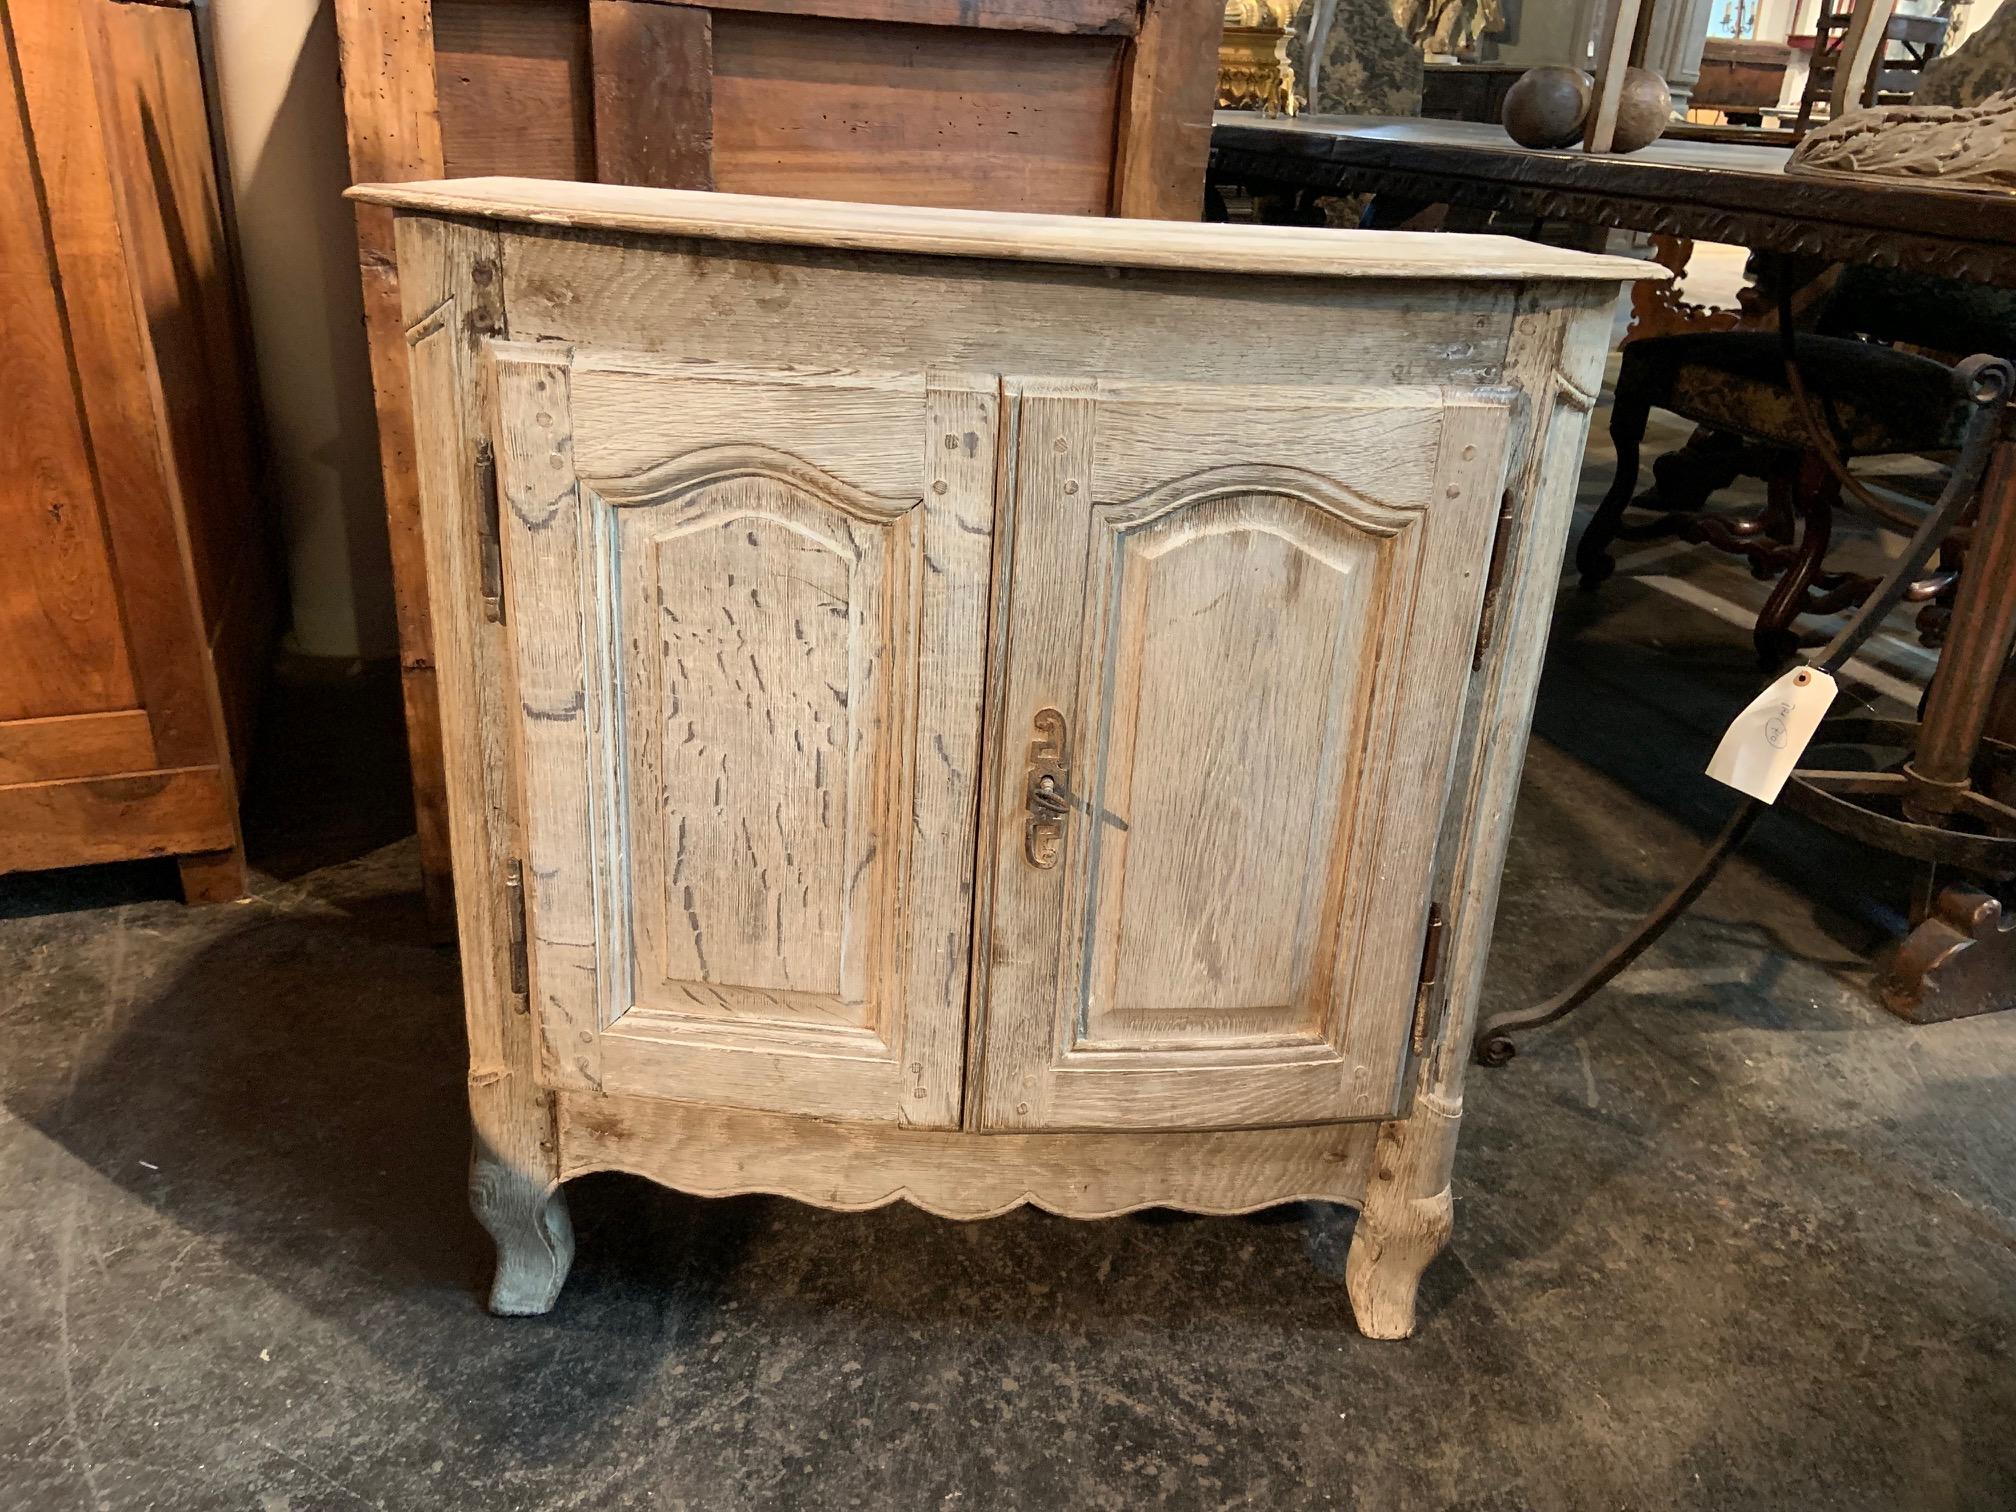 A very charming later 19th century Provencal petit buffet - or side cabinet wonderfully constructed in bleached or washed oak. Perfect as a bedside cabinet or converted into a bath or powder room vanity.